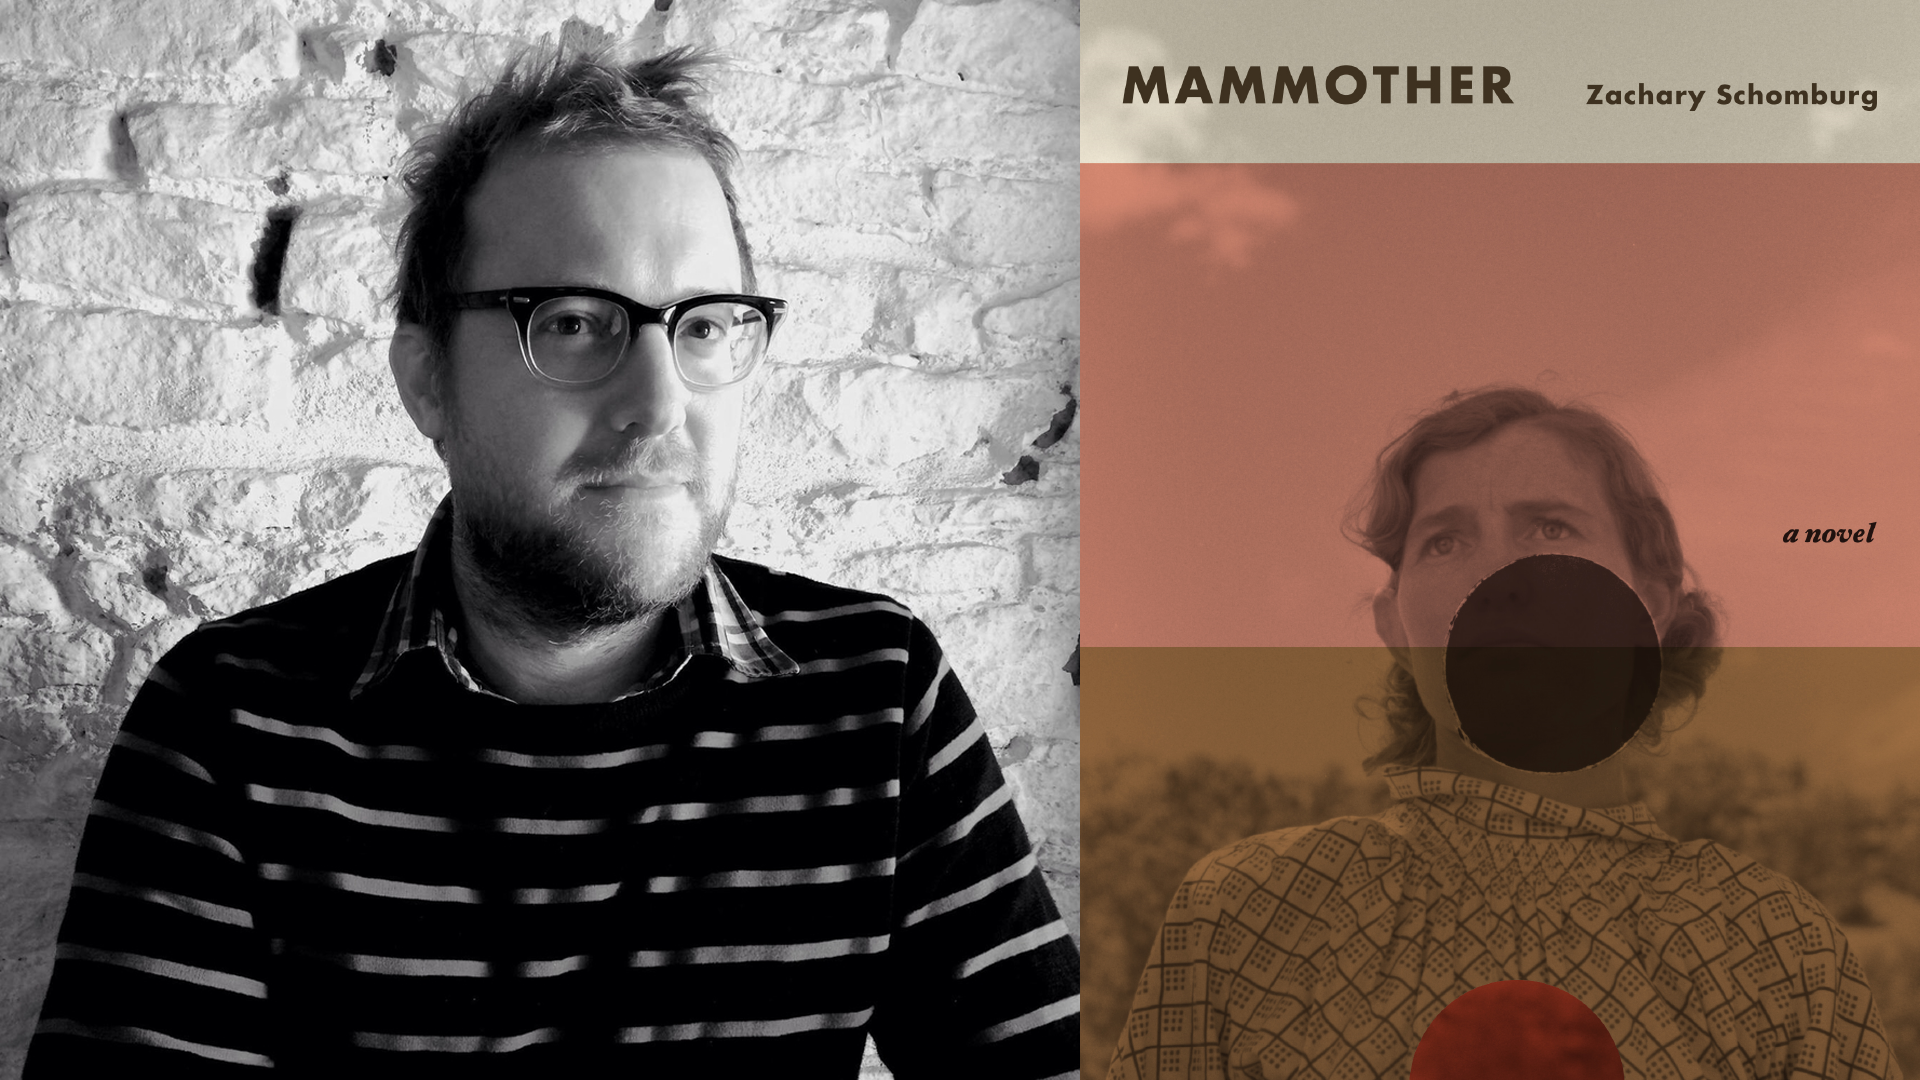 Photo of Zachary Schomburg and the cover of his novel MAMMOTHER; links to news story